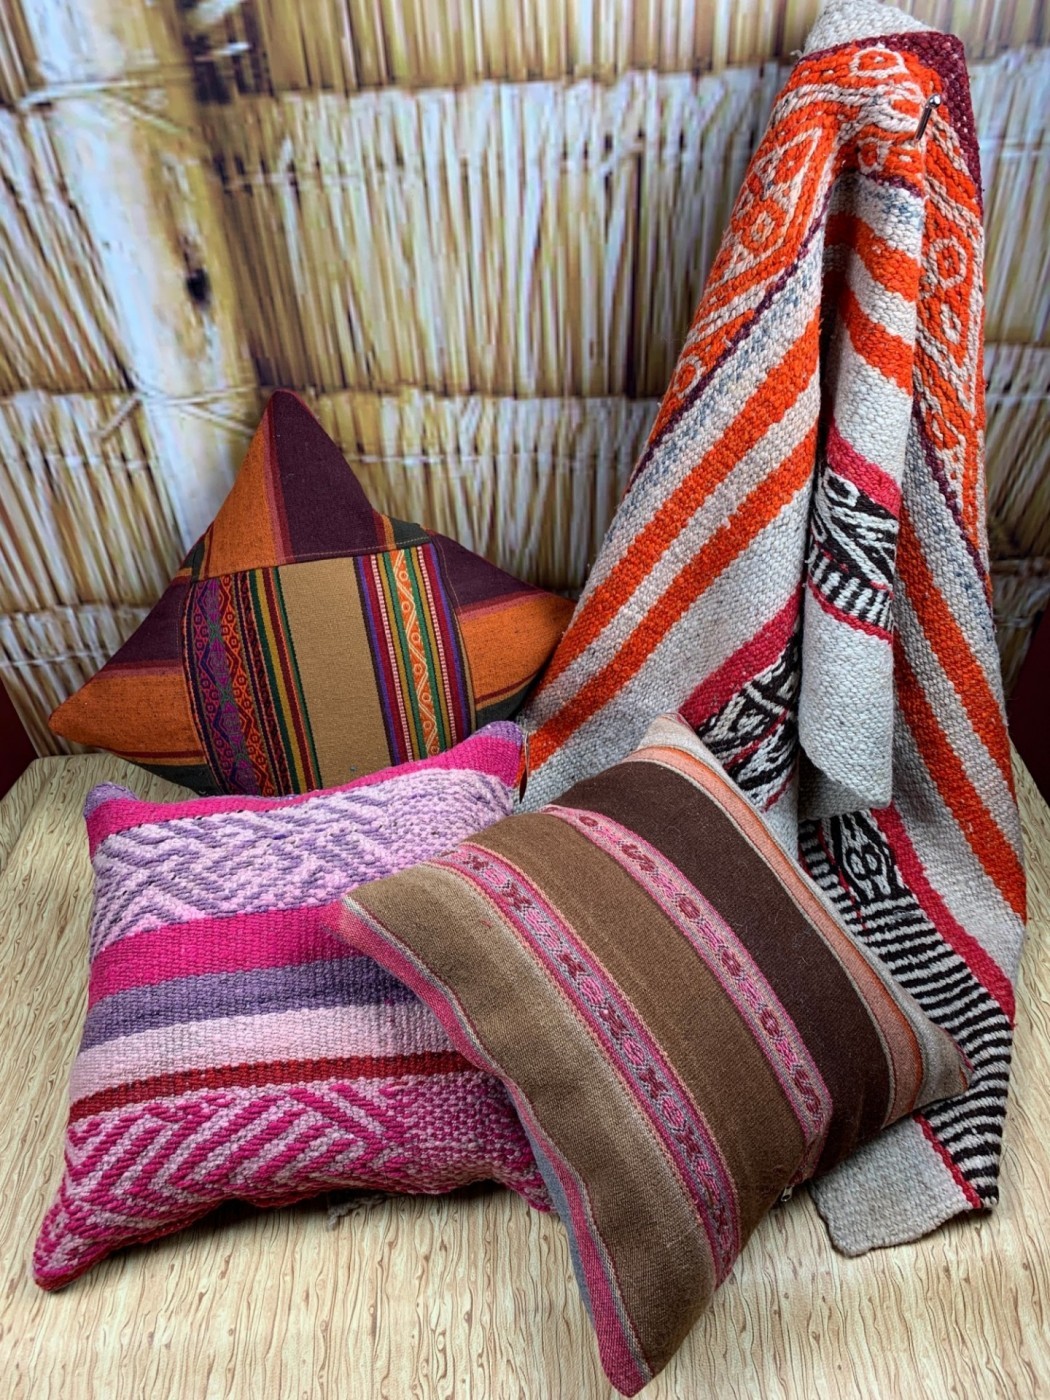 Woven pillows and a blanket on a straw ottoman.  